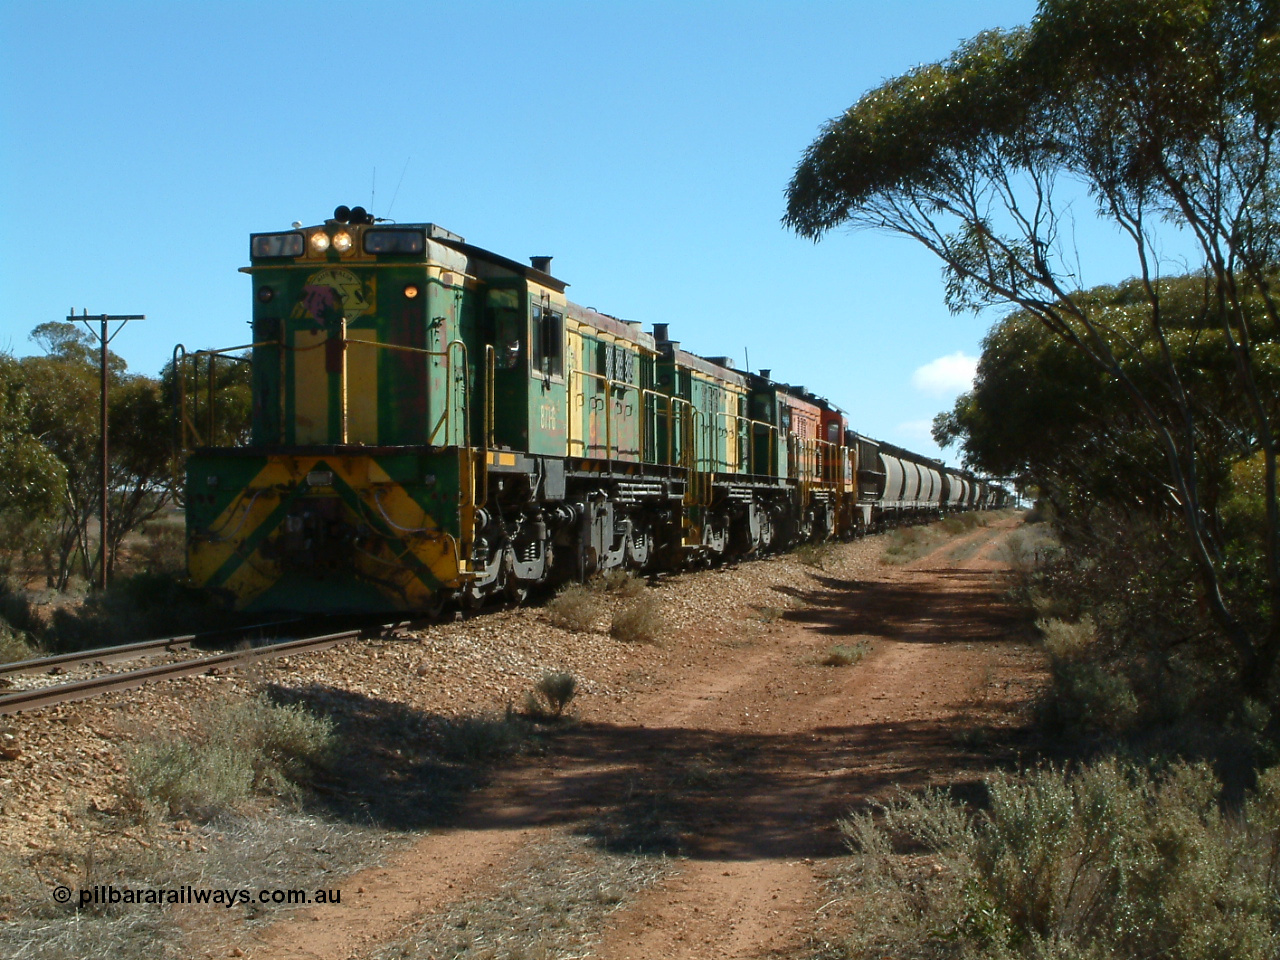 030411 101736
Kimba Grain Bunker, train loading is almost complete with triple ALCo combination of 830 classes 871 and 872 and DA 7, model DL 531G/1, converted from 4813. 11th April 2003. [url=https://goo.gl/maps/Et8bgaqpMnn]Geodata here[/url].
